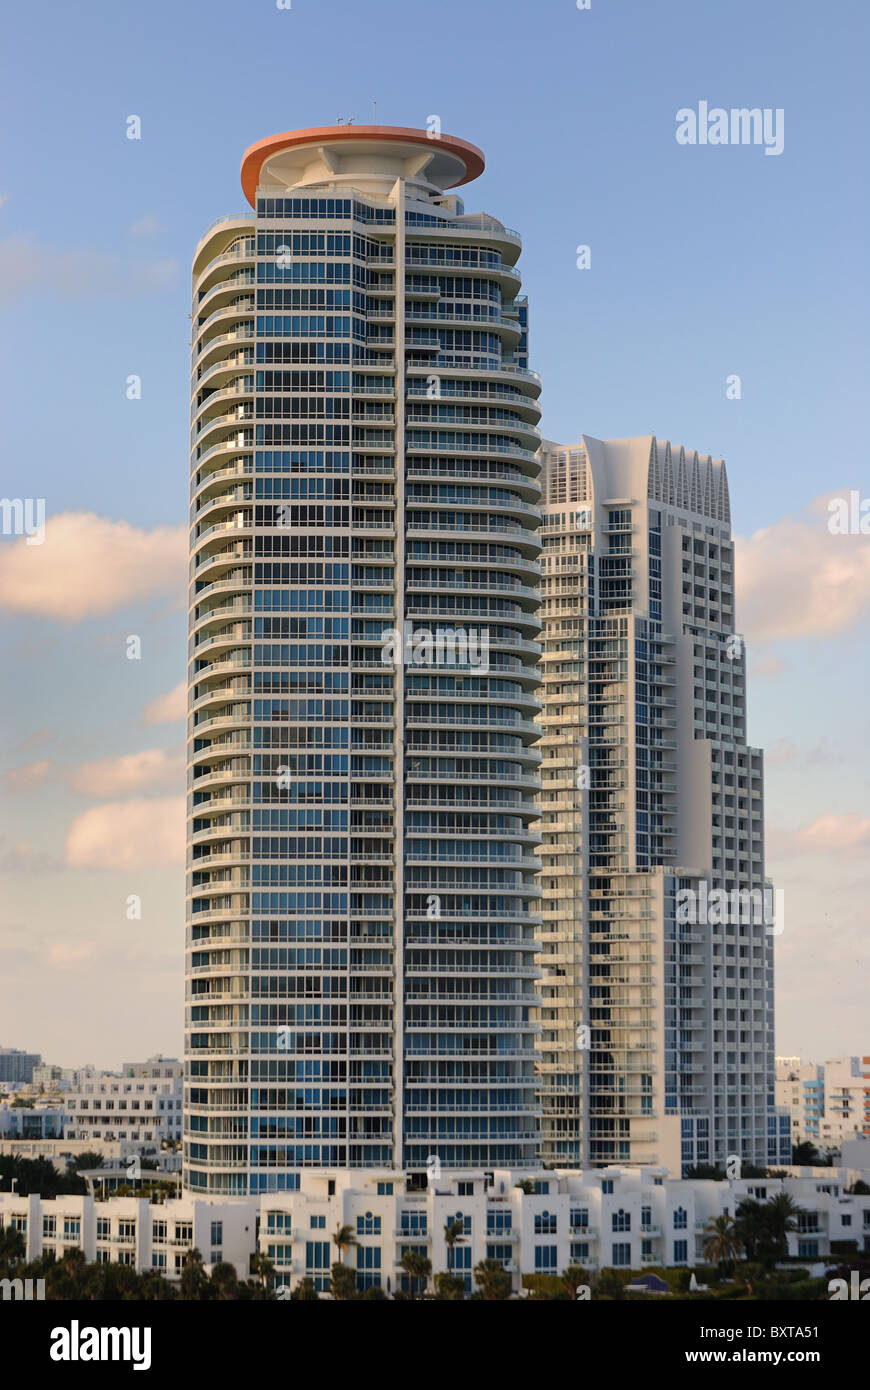 Residential high rise in Miami, Florida. Stock Photo